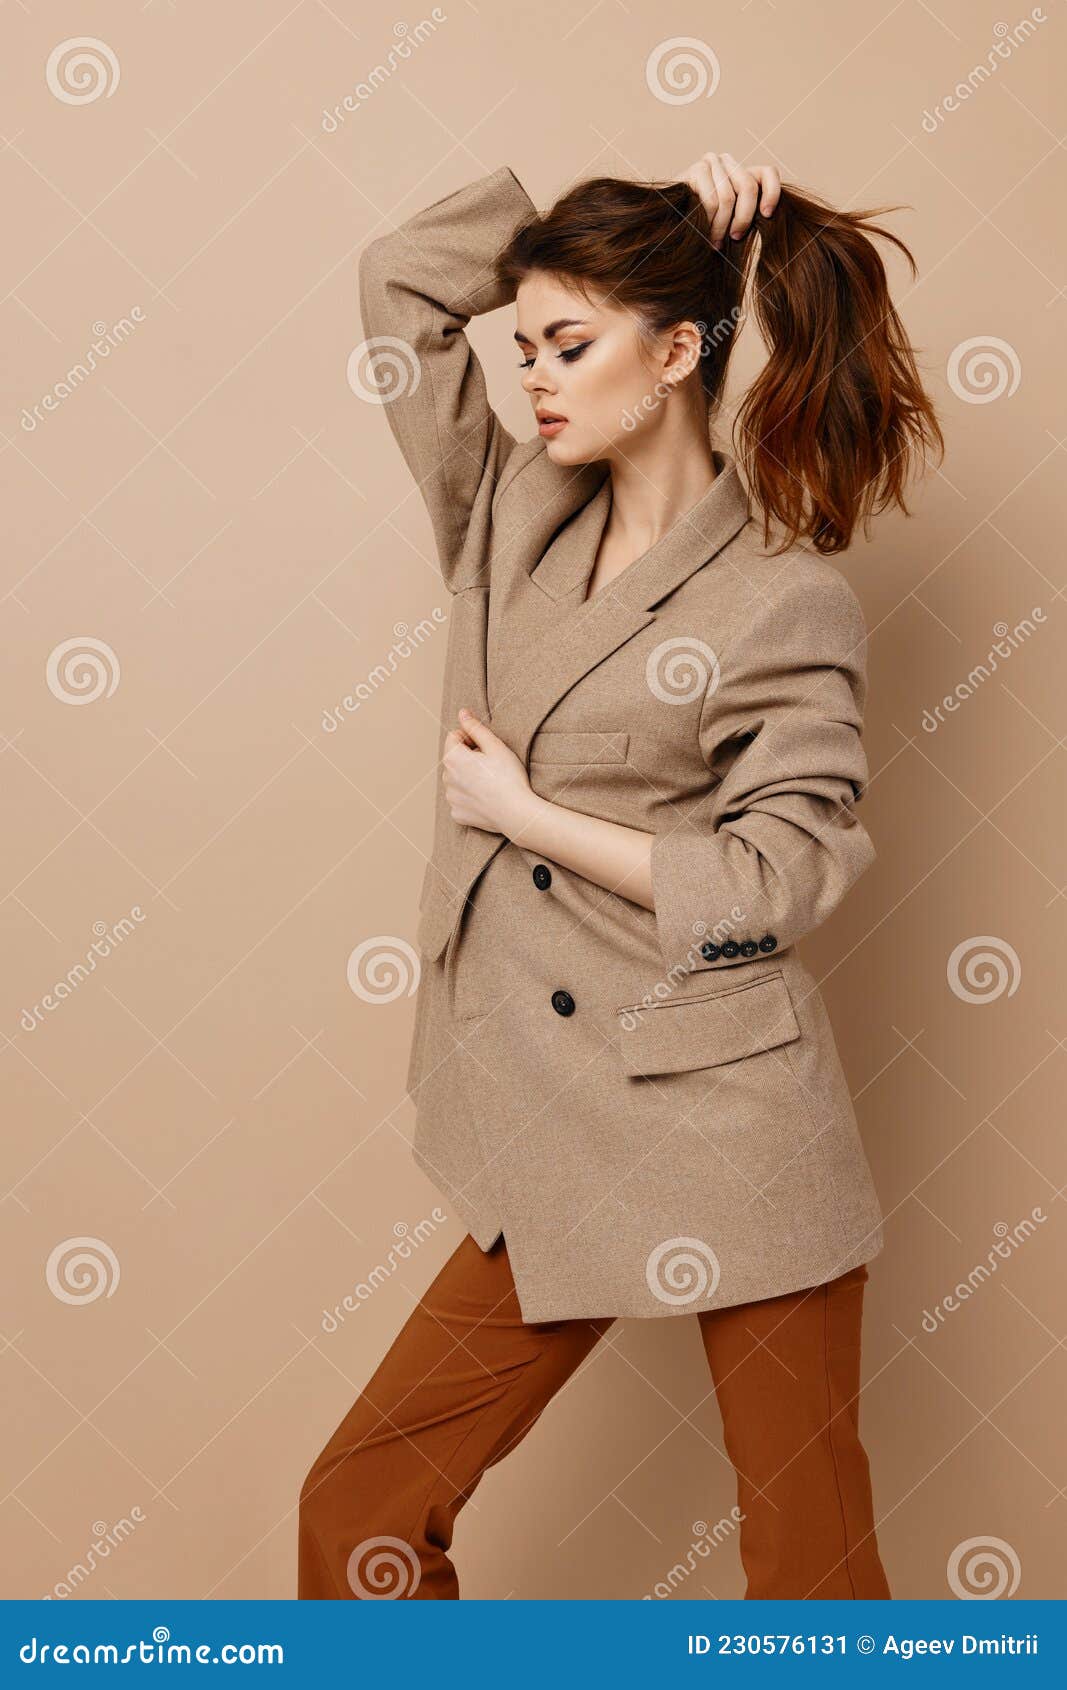 Woman in Fashionable Clothes Coat Pants Beige Background Hairstyle Model  Stock Image - Image of brunette, nude: 230576131